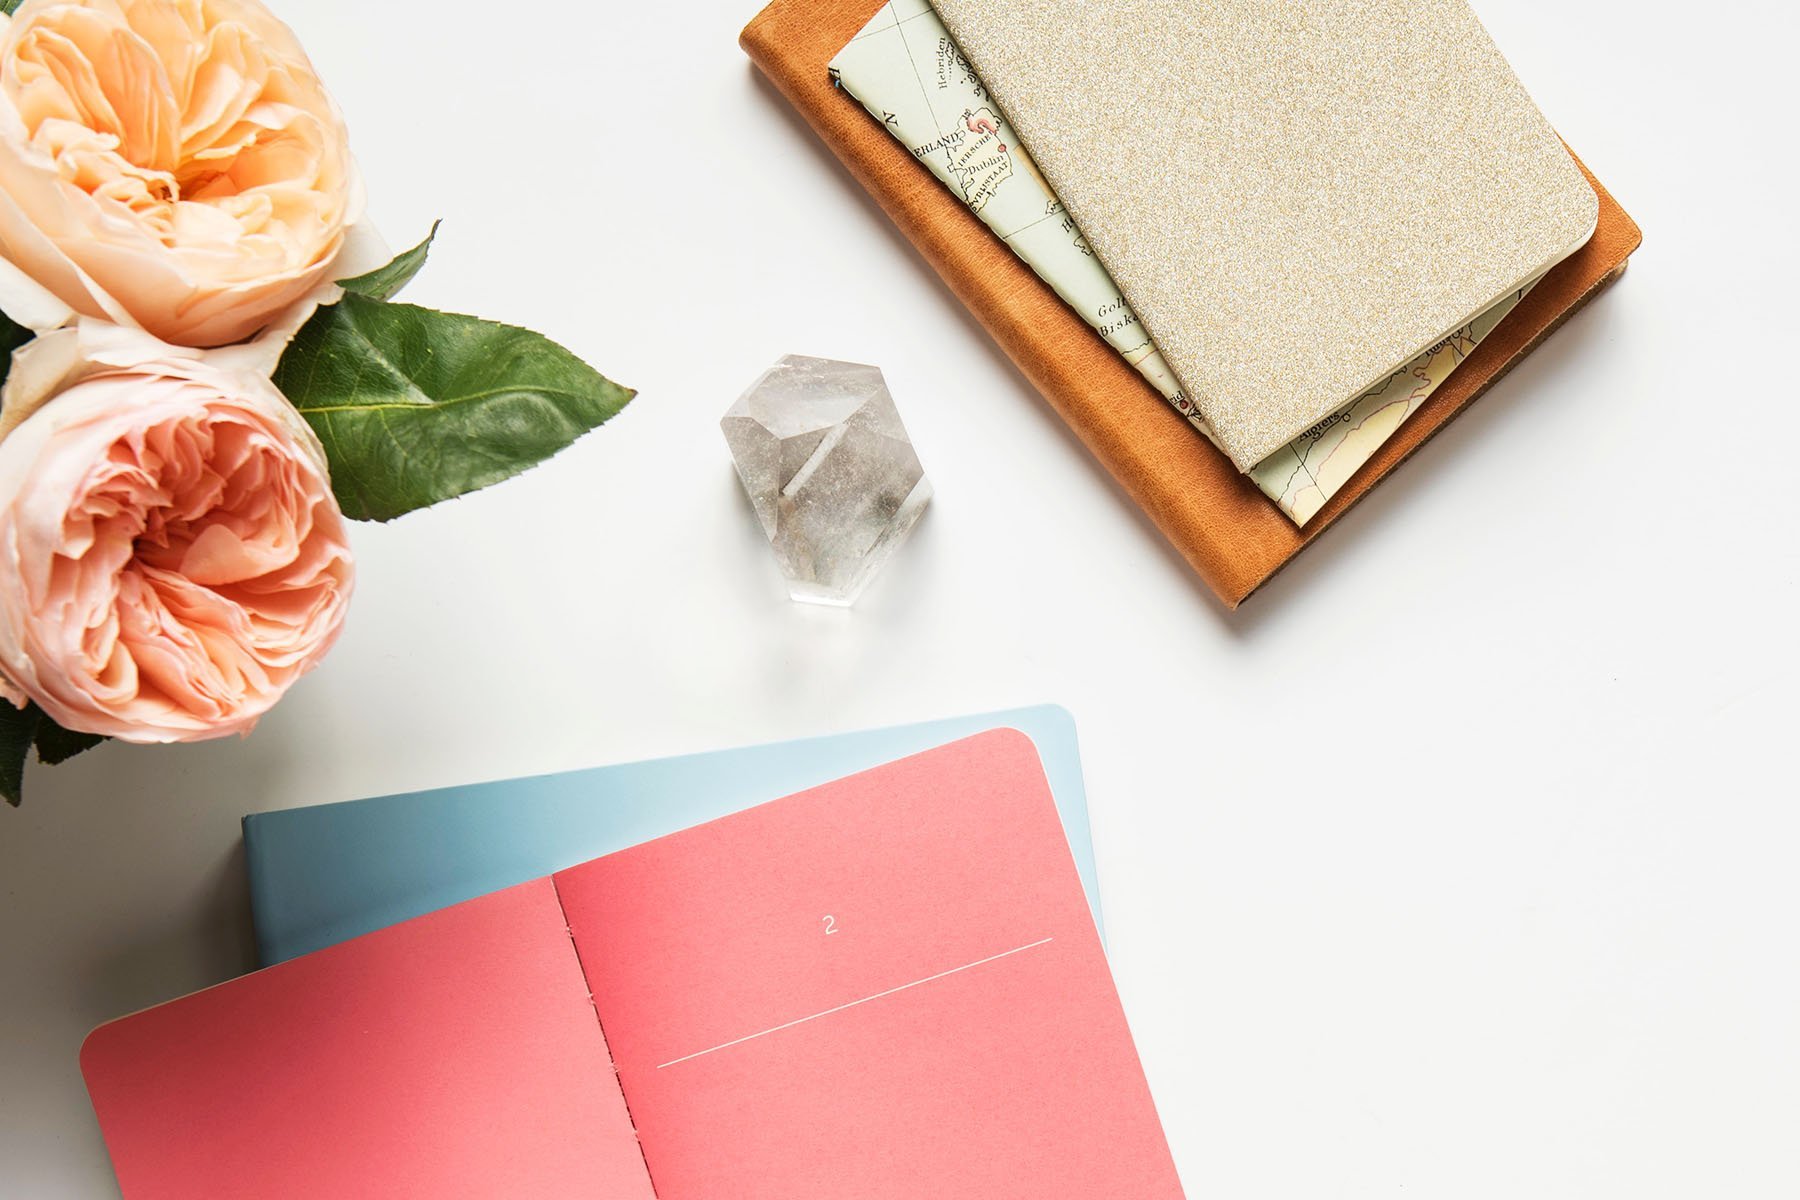 8 Mind-Clearing and Productive Crystals to Keep at Your Work Desk